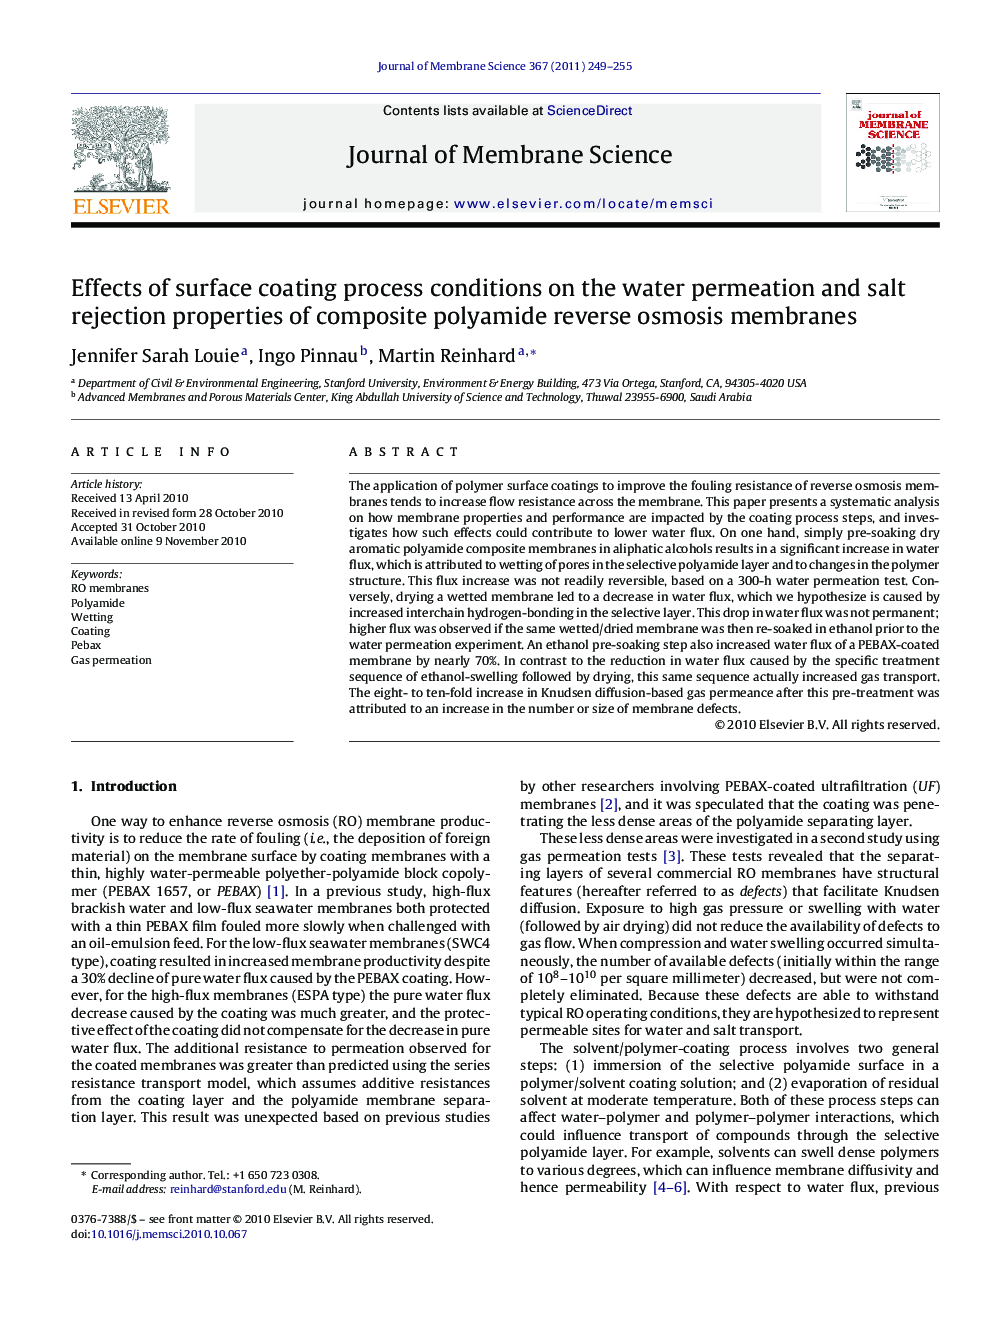 Effects of surface coating process conditions on the water permeation and salt rejection properties of composite polyamide reverse osmosis membranes